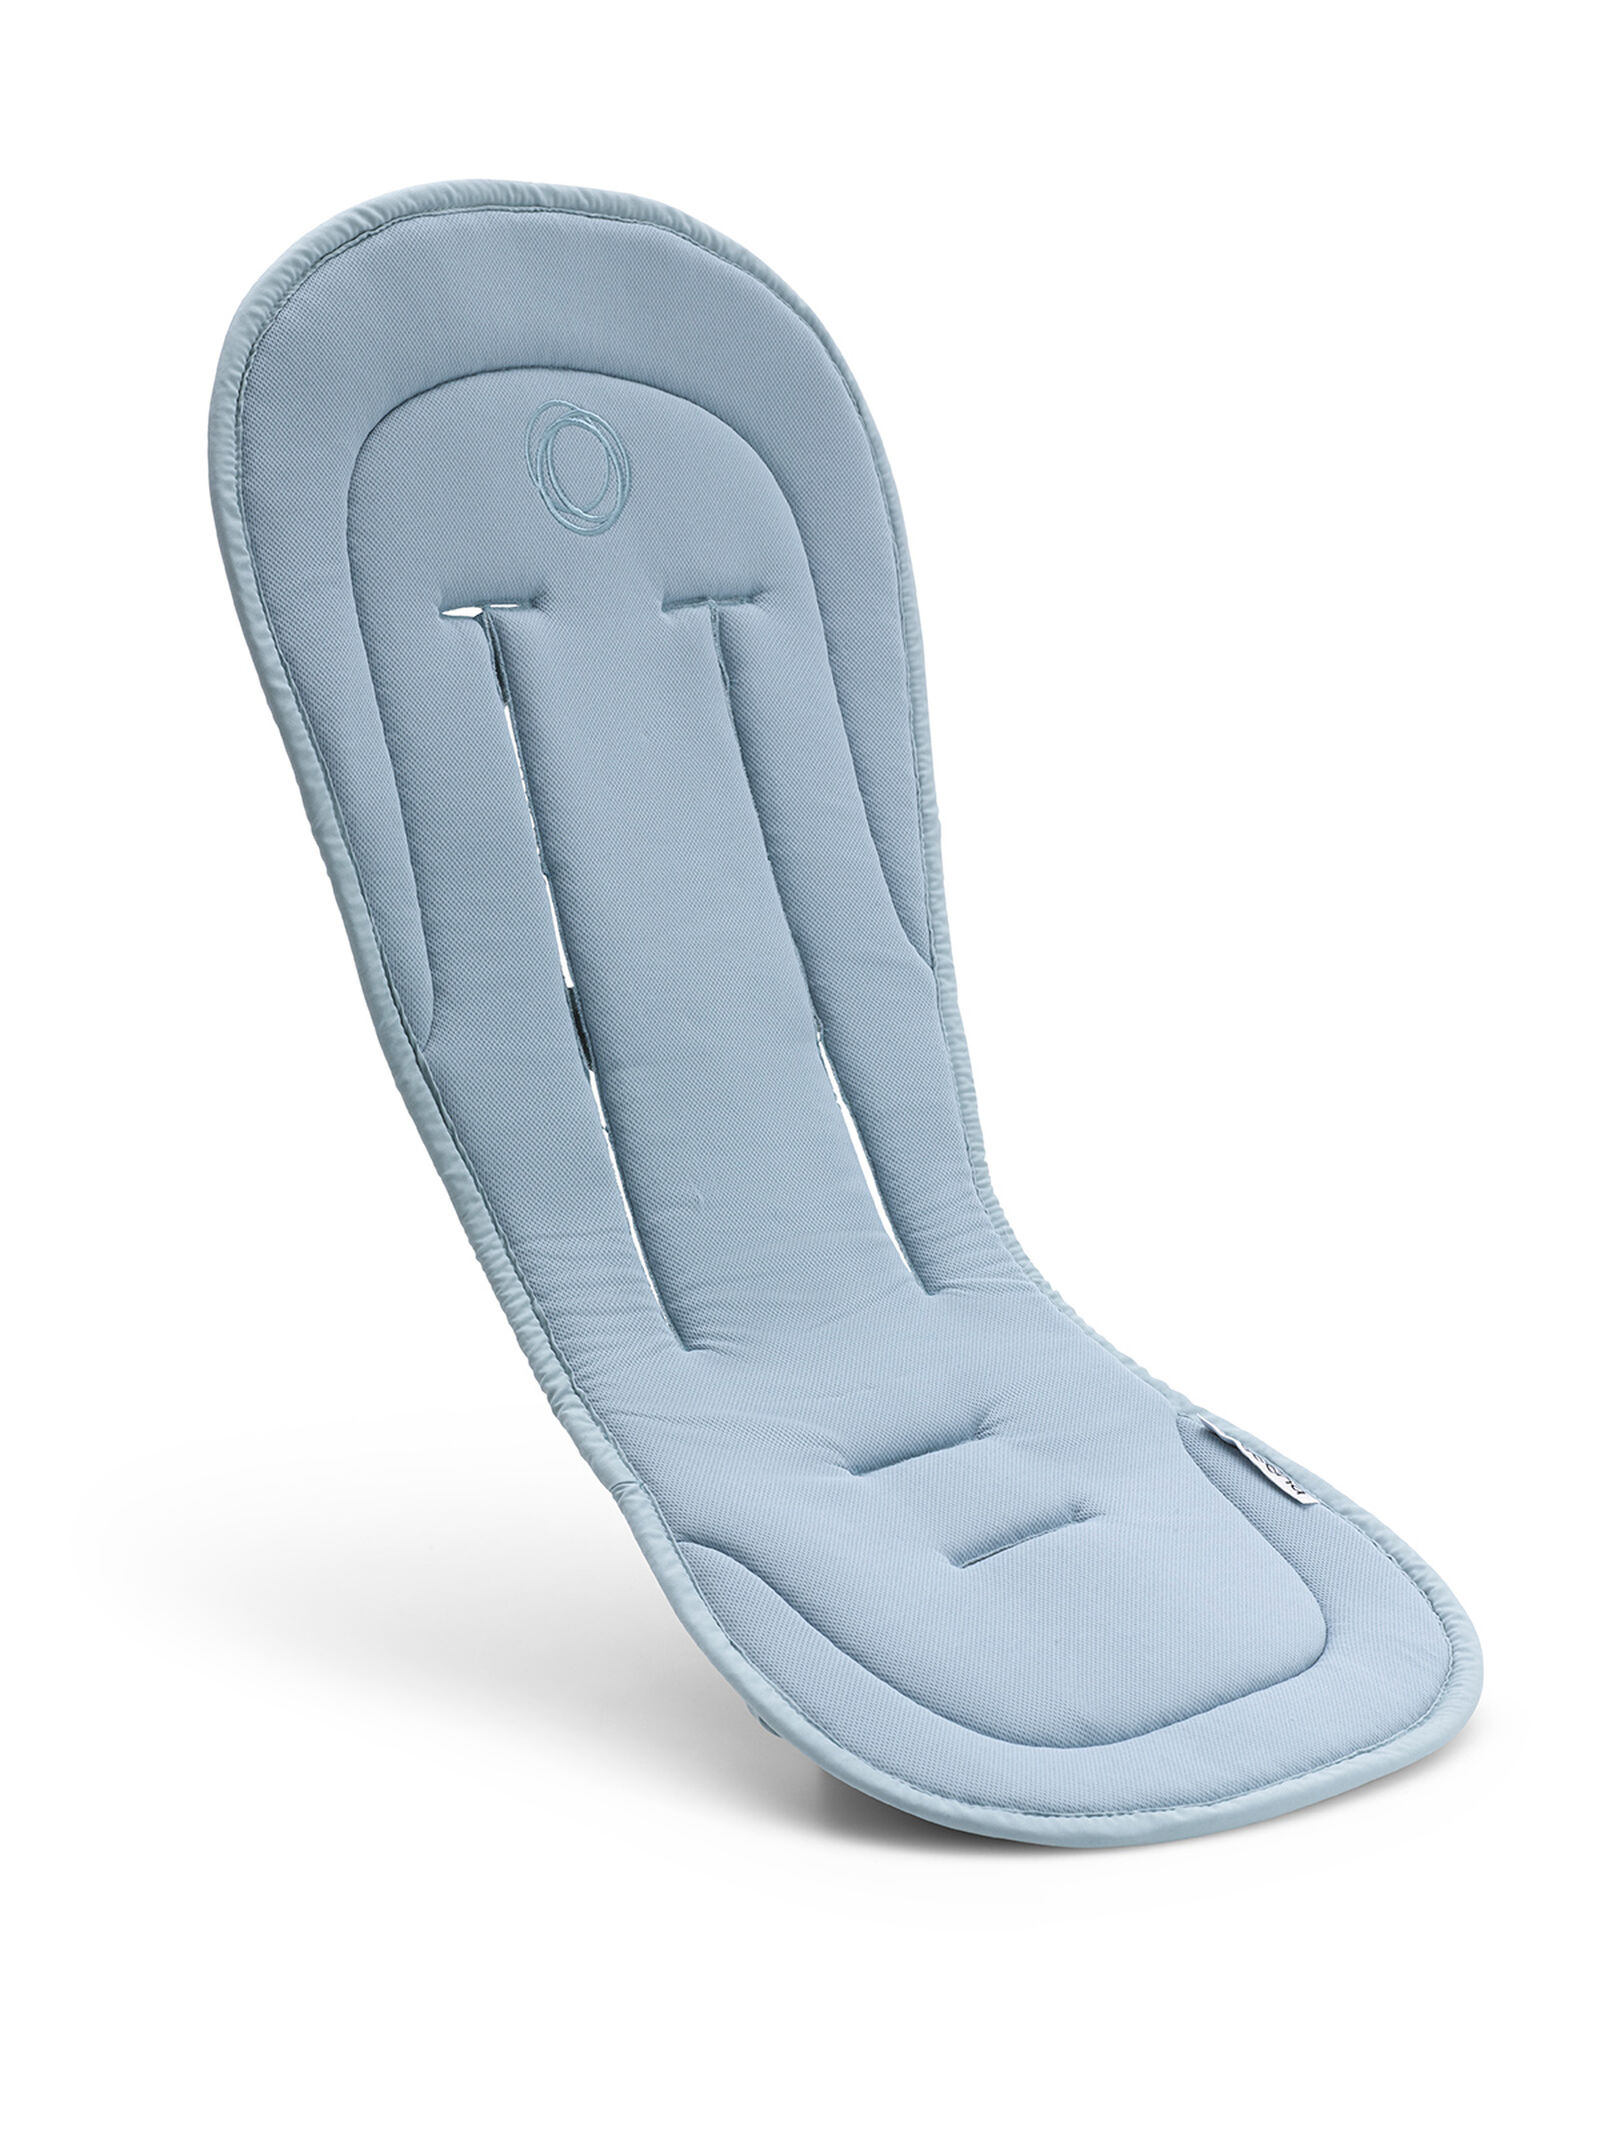 Bugaboo breezy seat liner